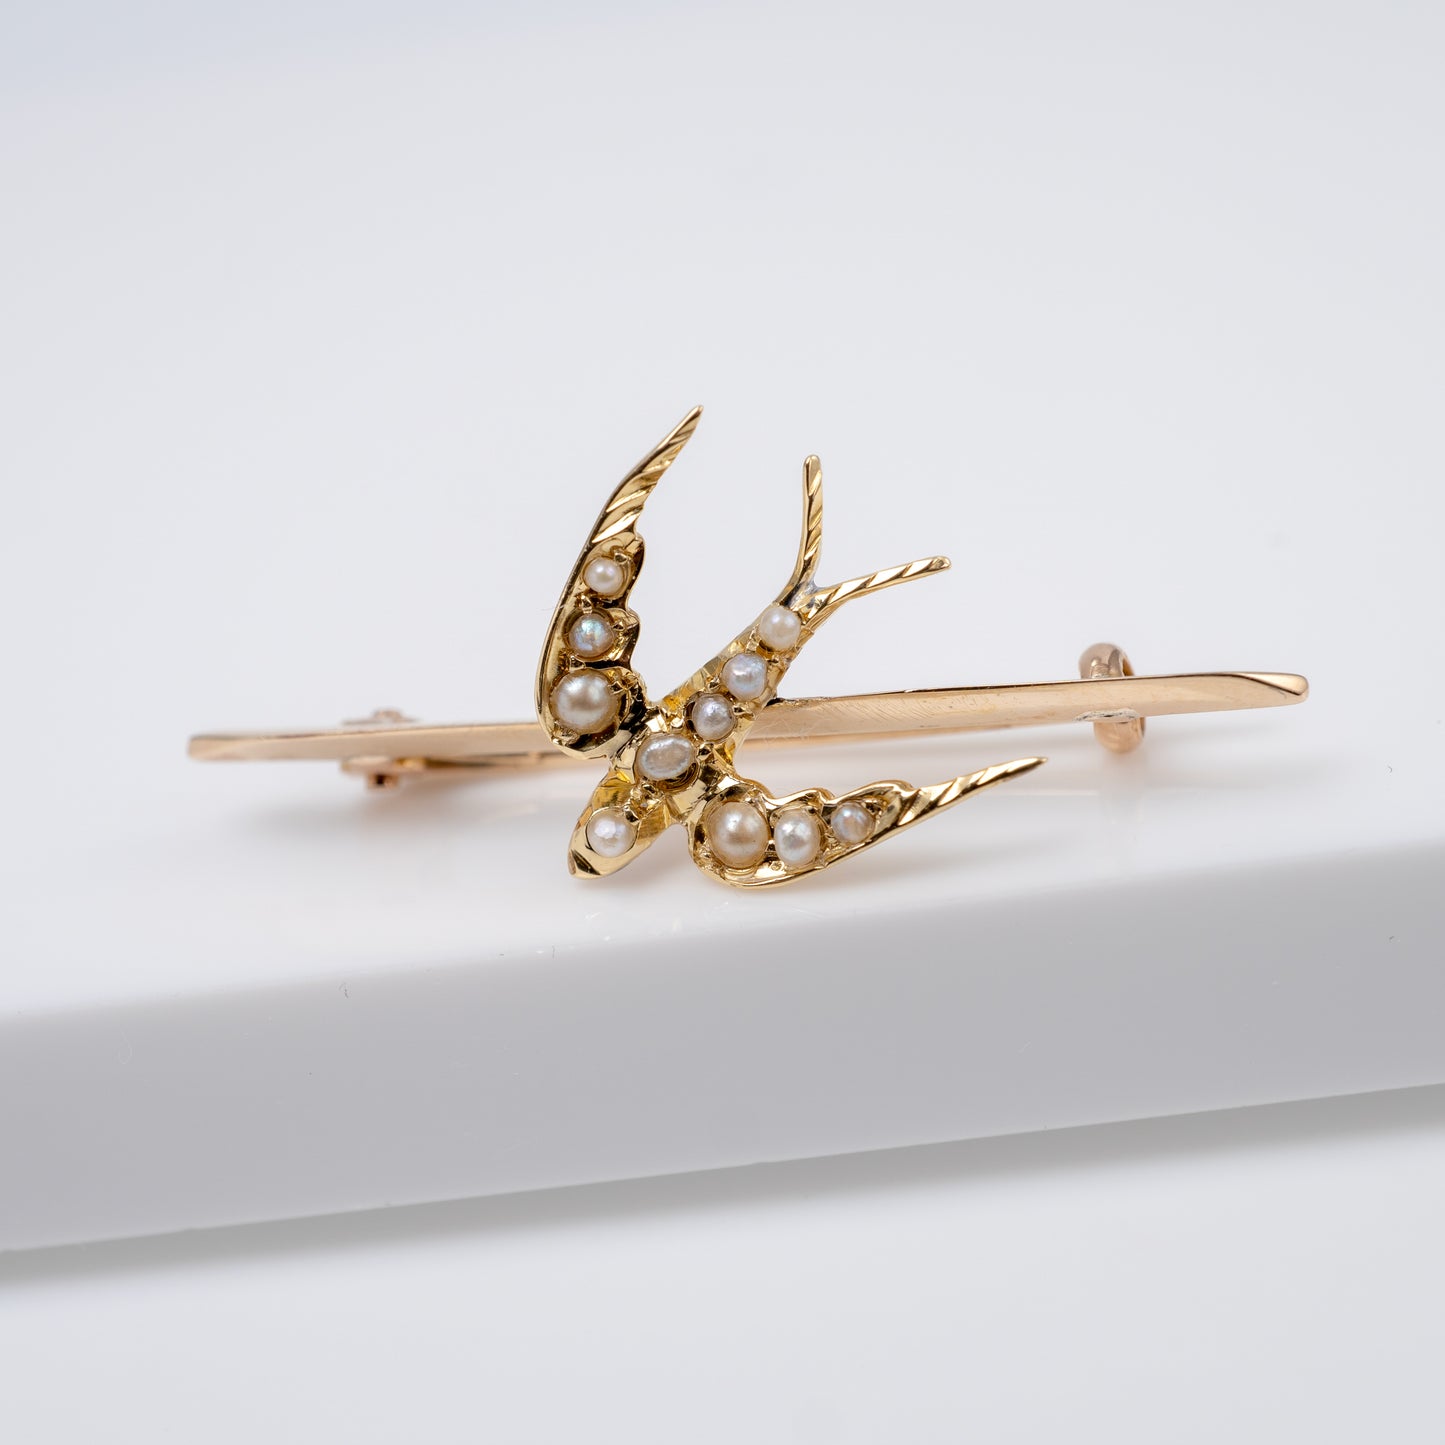 Antique Swallow Bird Pin With Pearls - Hunters Fine Jewellery